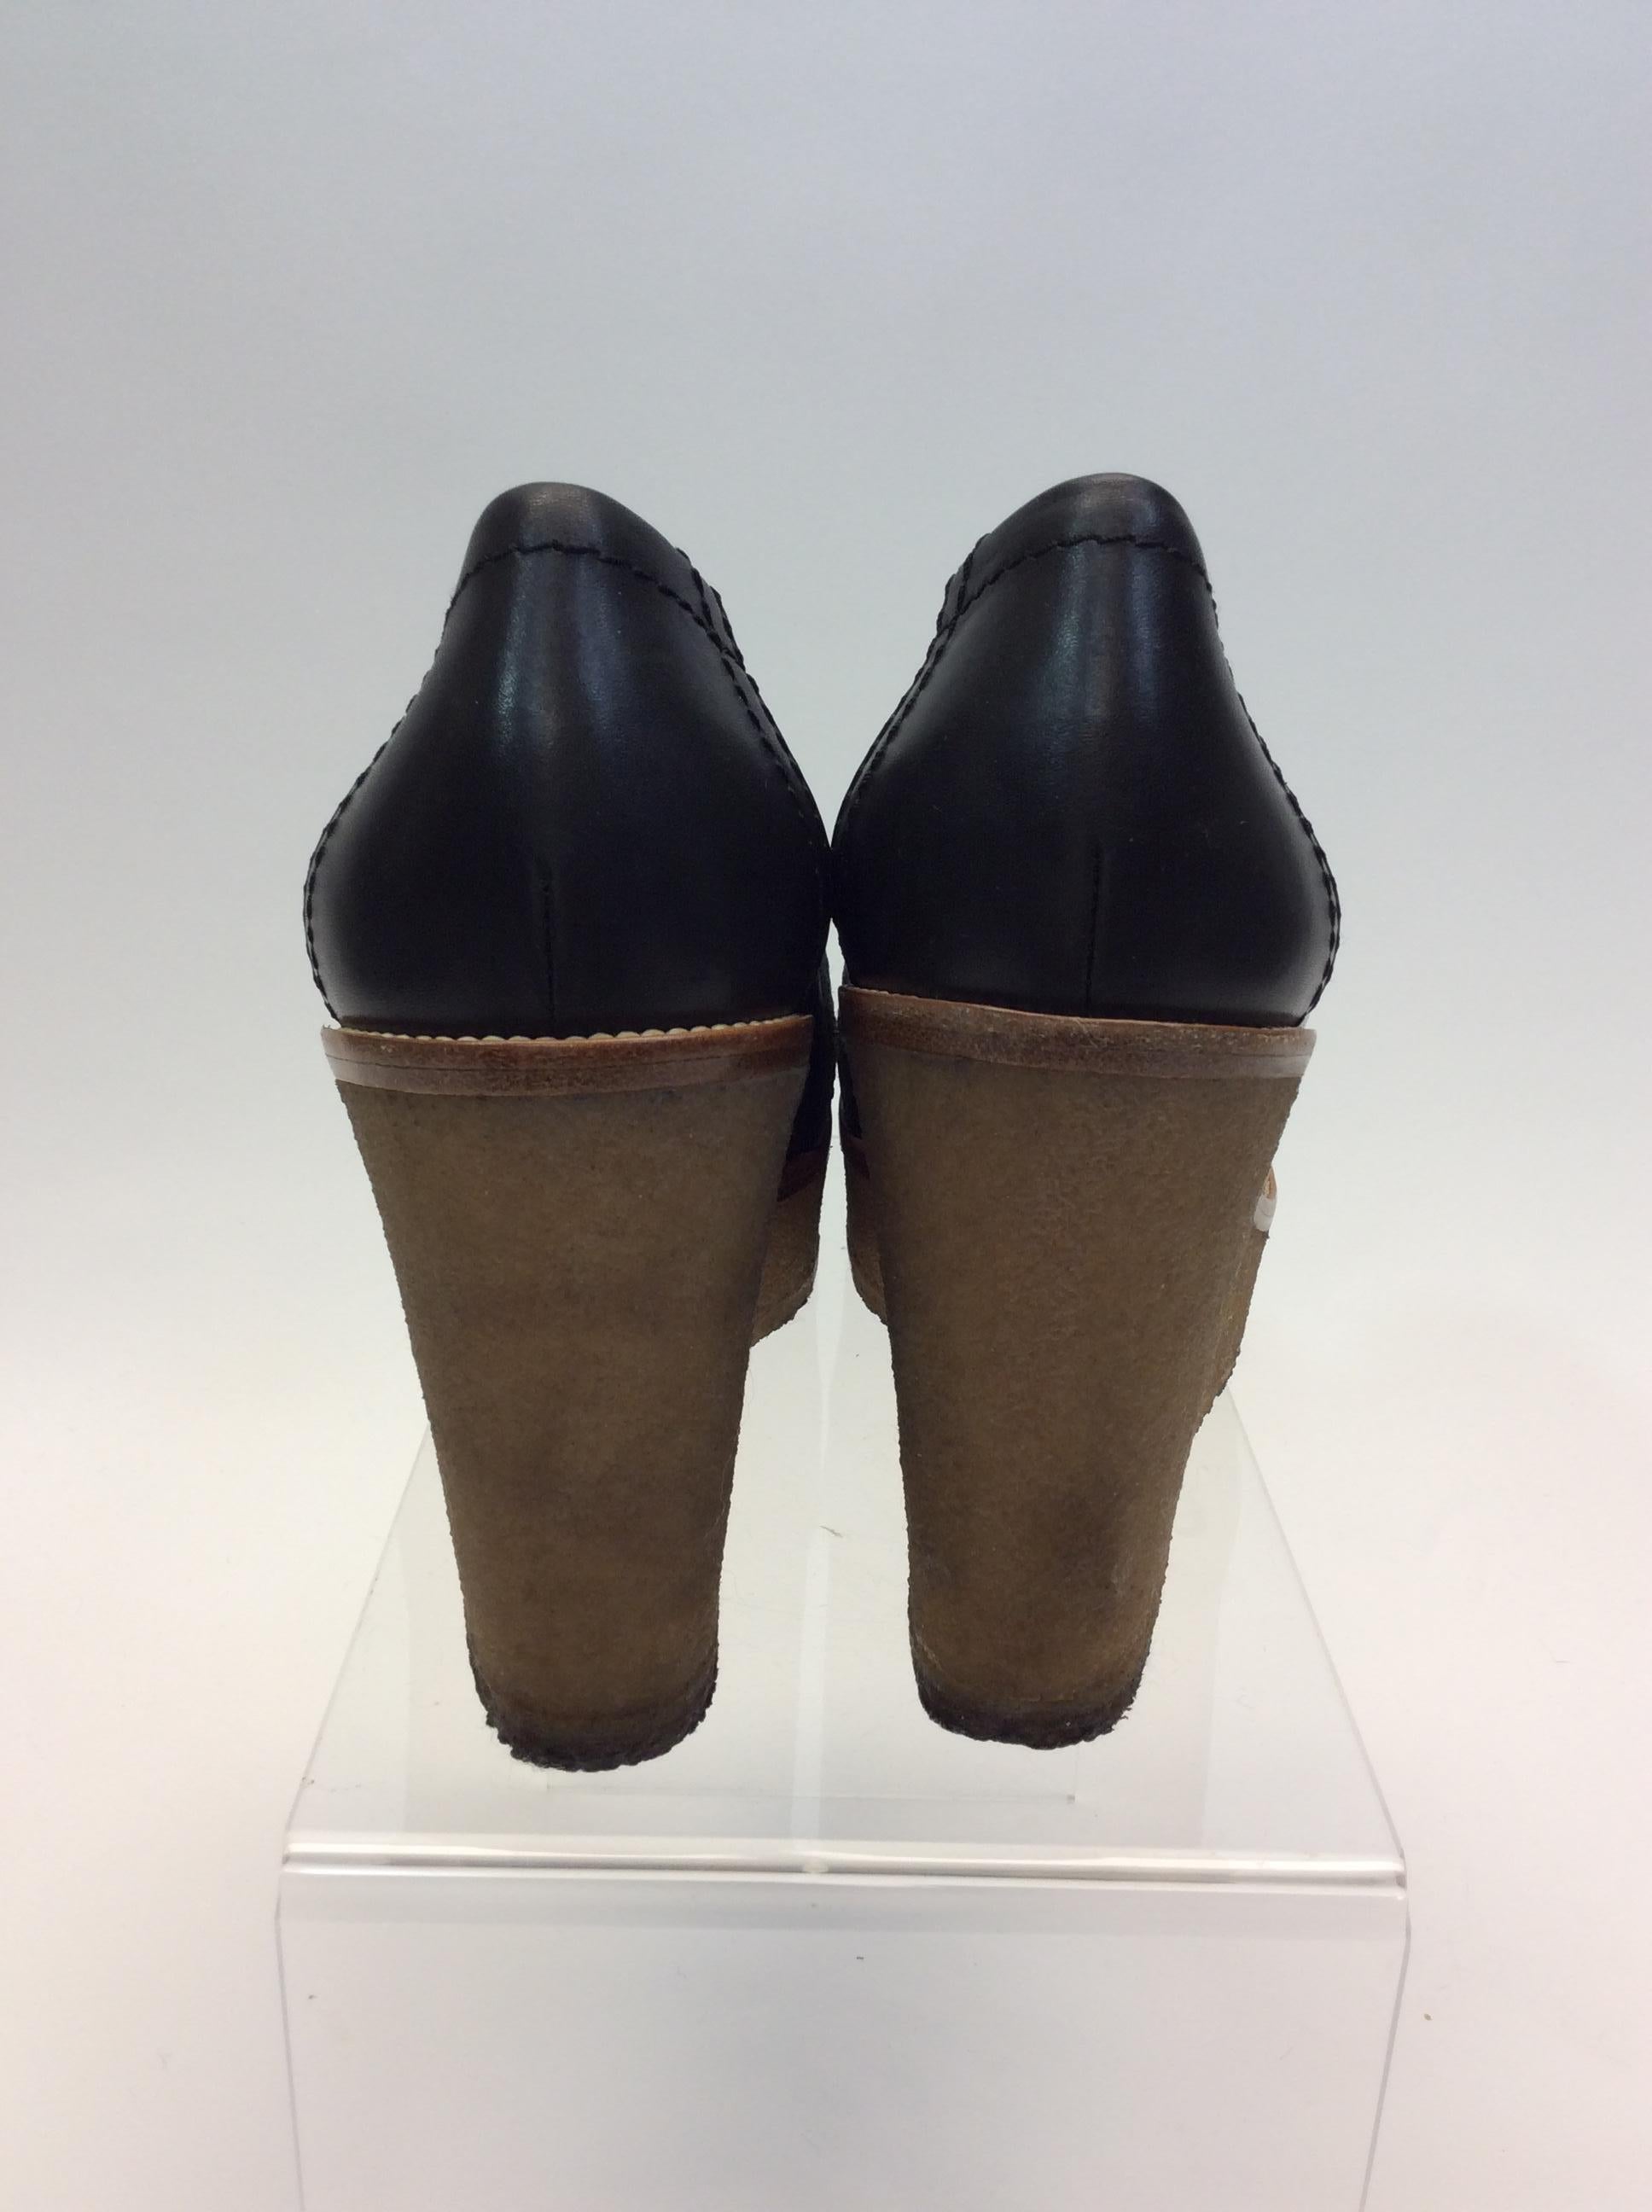 Yves Saint Laurent Black Leather Wedges In Good Condition For Sale In Narberth, PA